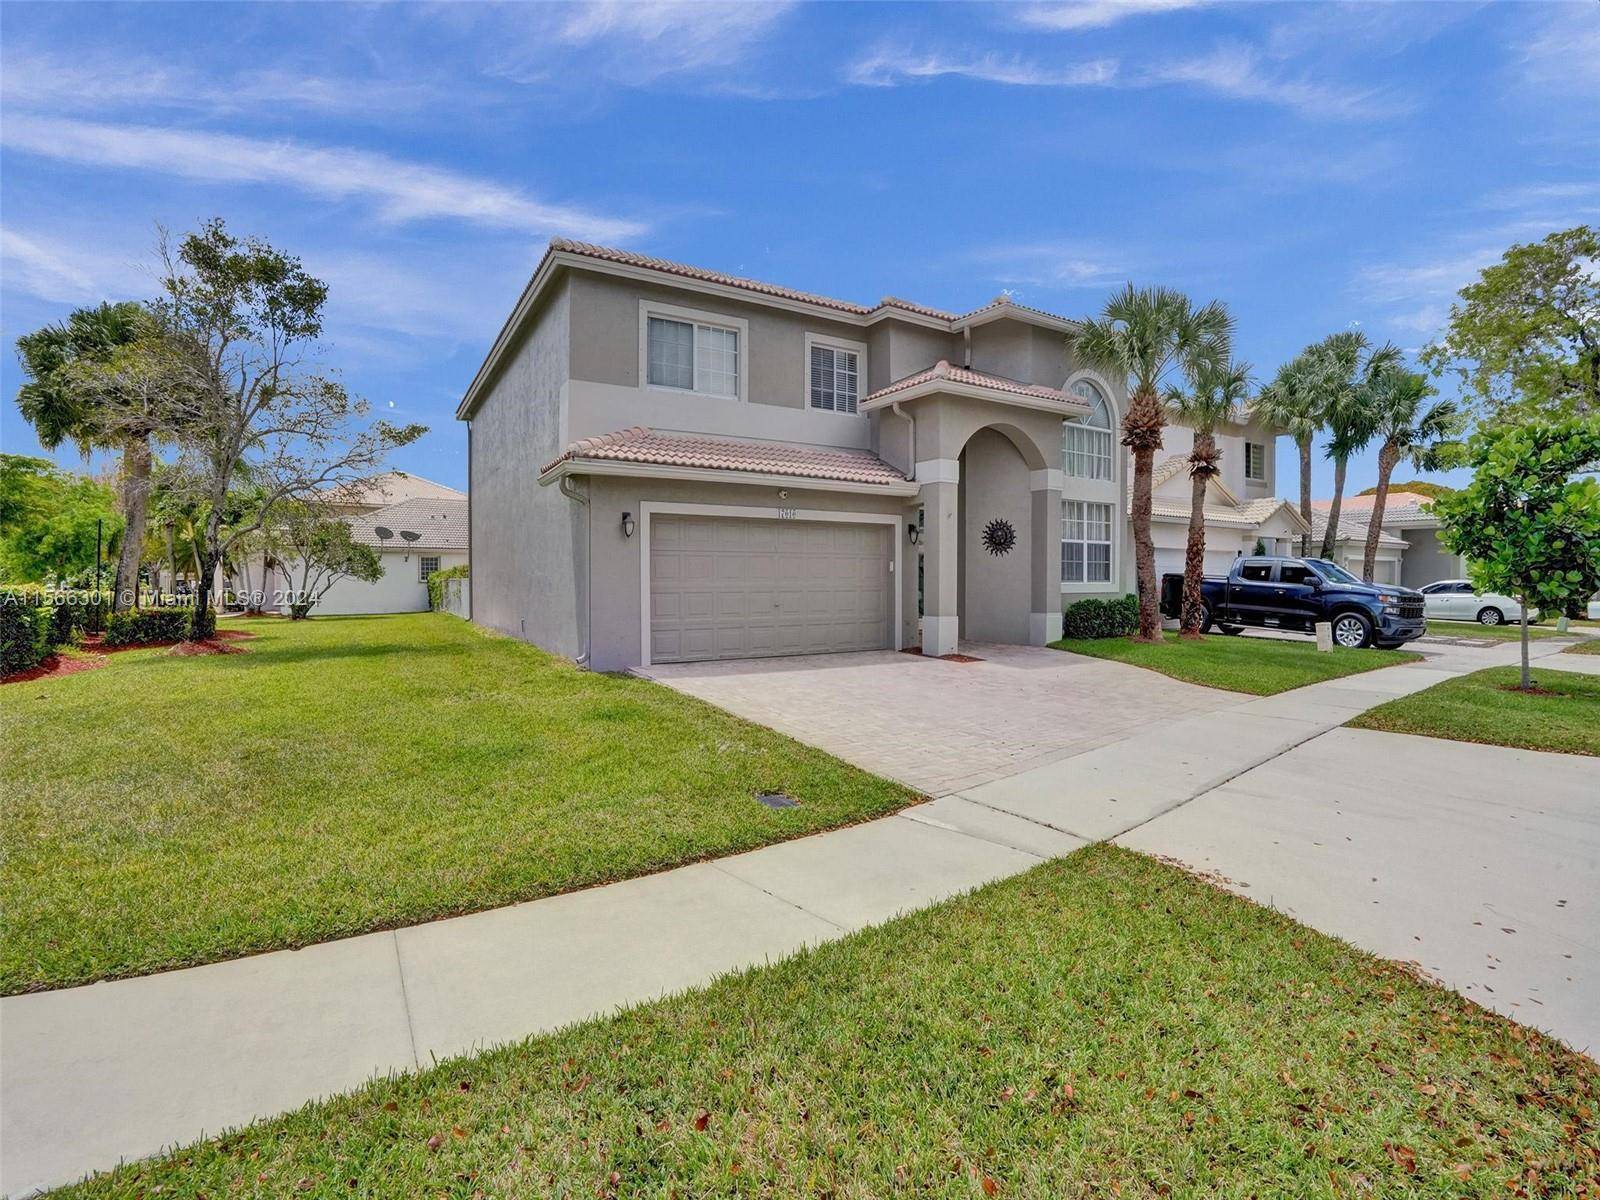 This rarely available 4 bed 3 bath home plus loft in highly desirable Pembroke Isles is move in ready !